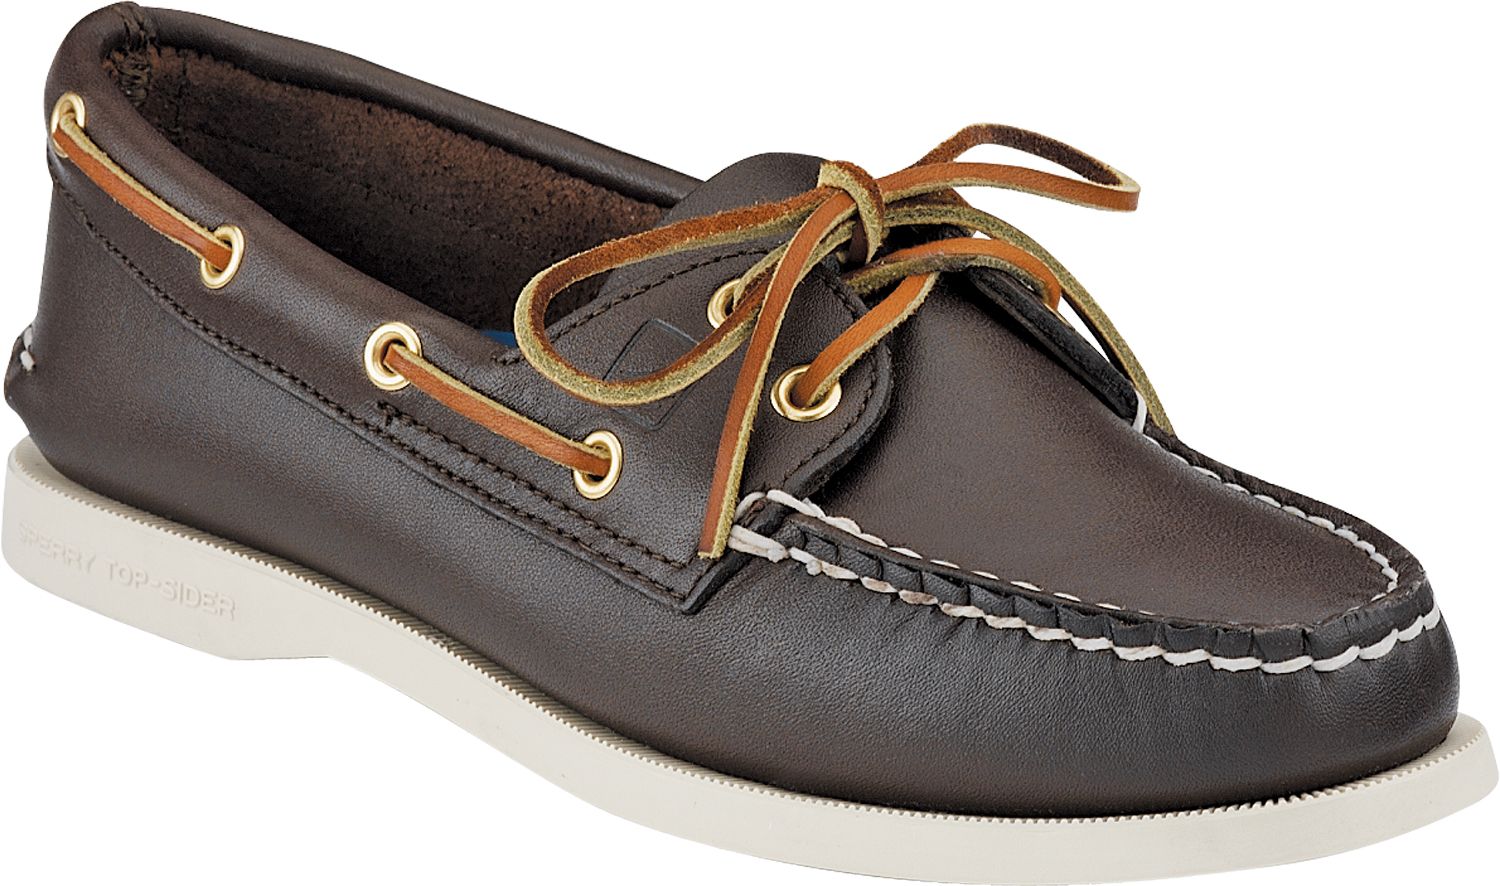 Sperry Top-Sider Women's Authentic 